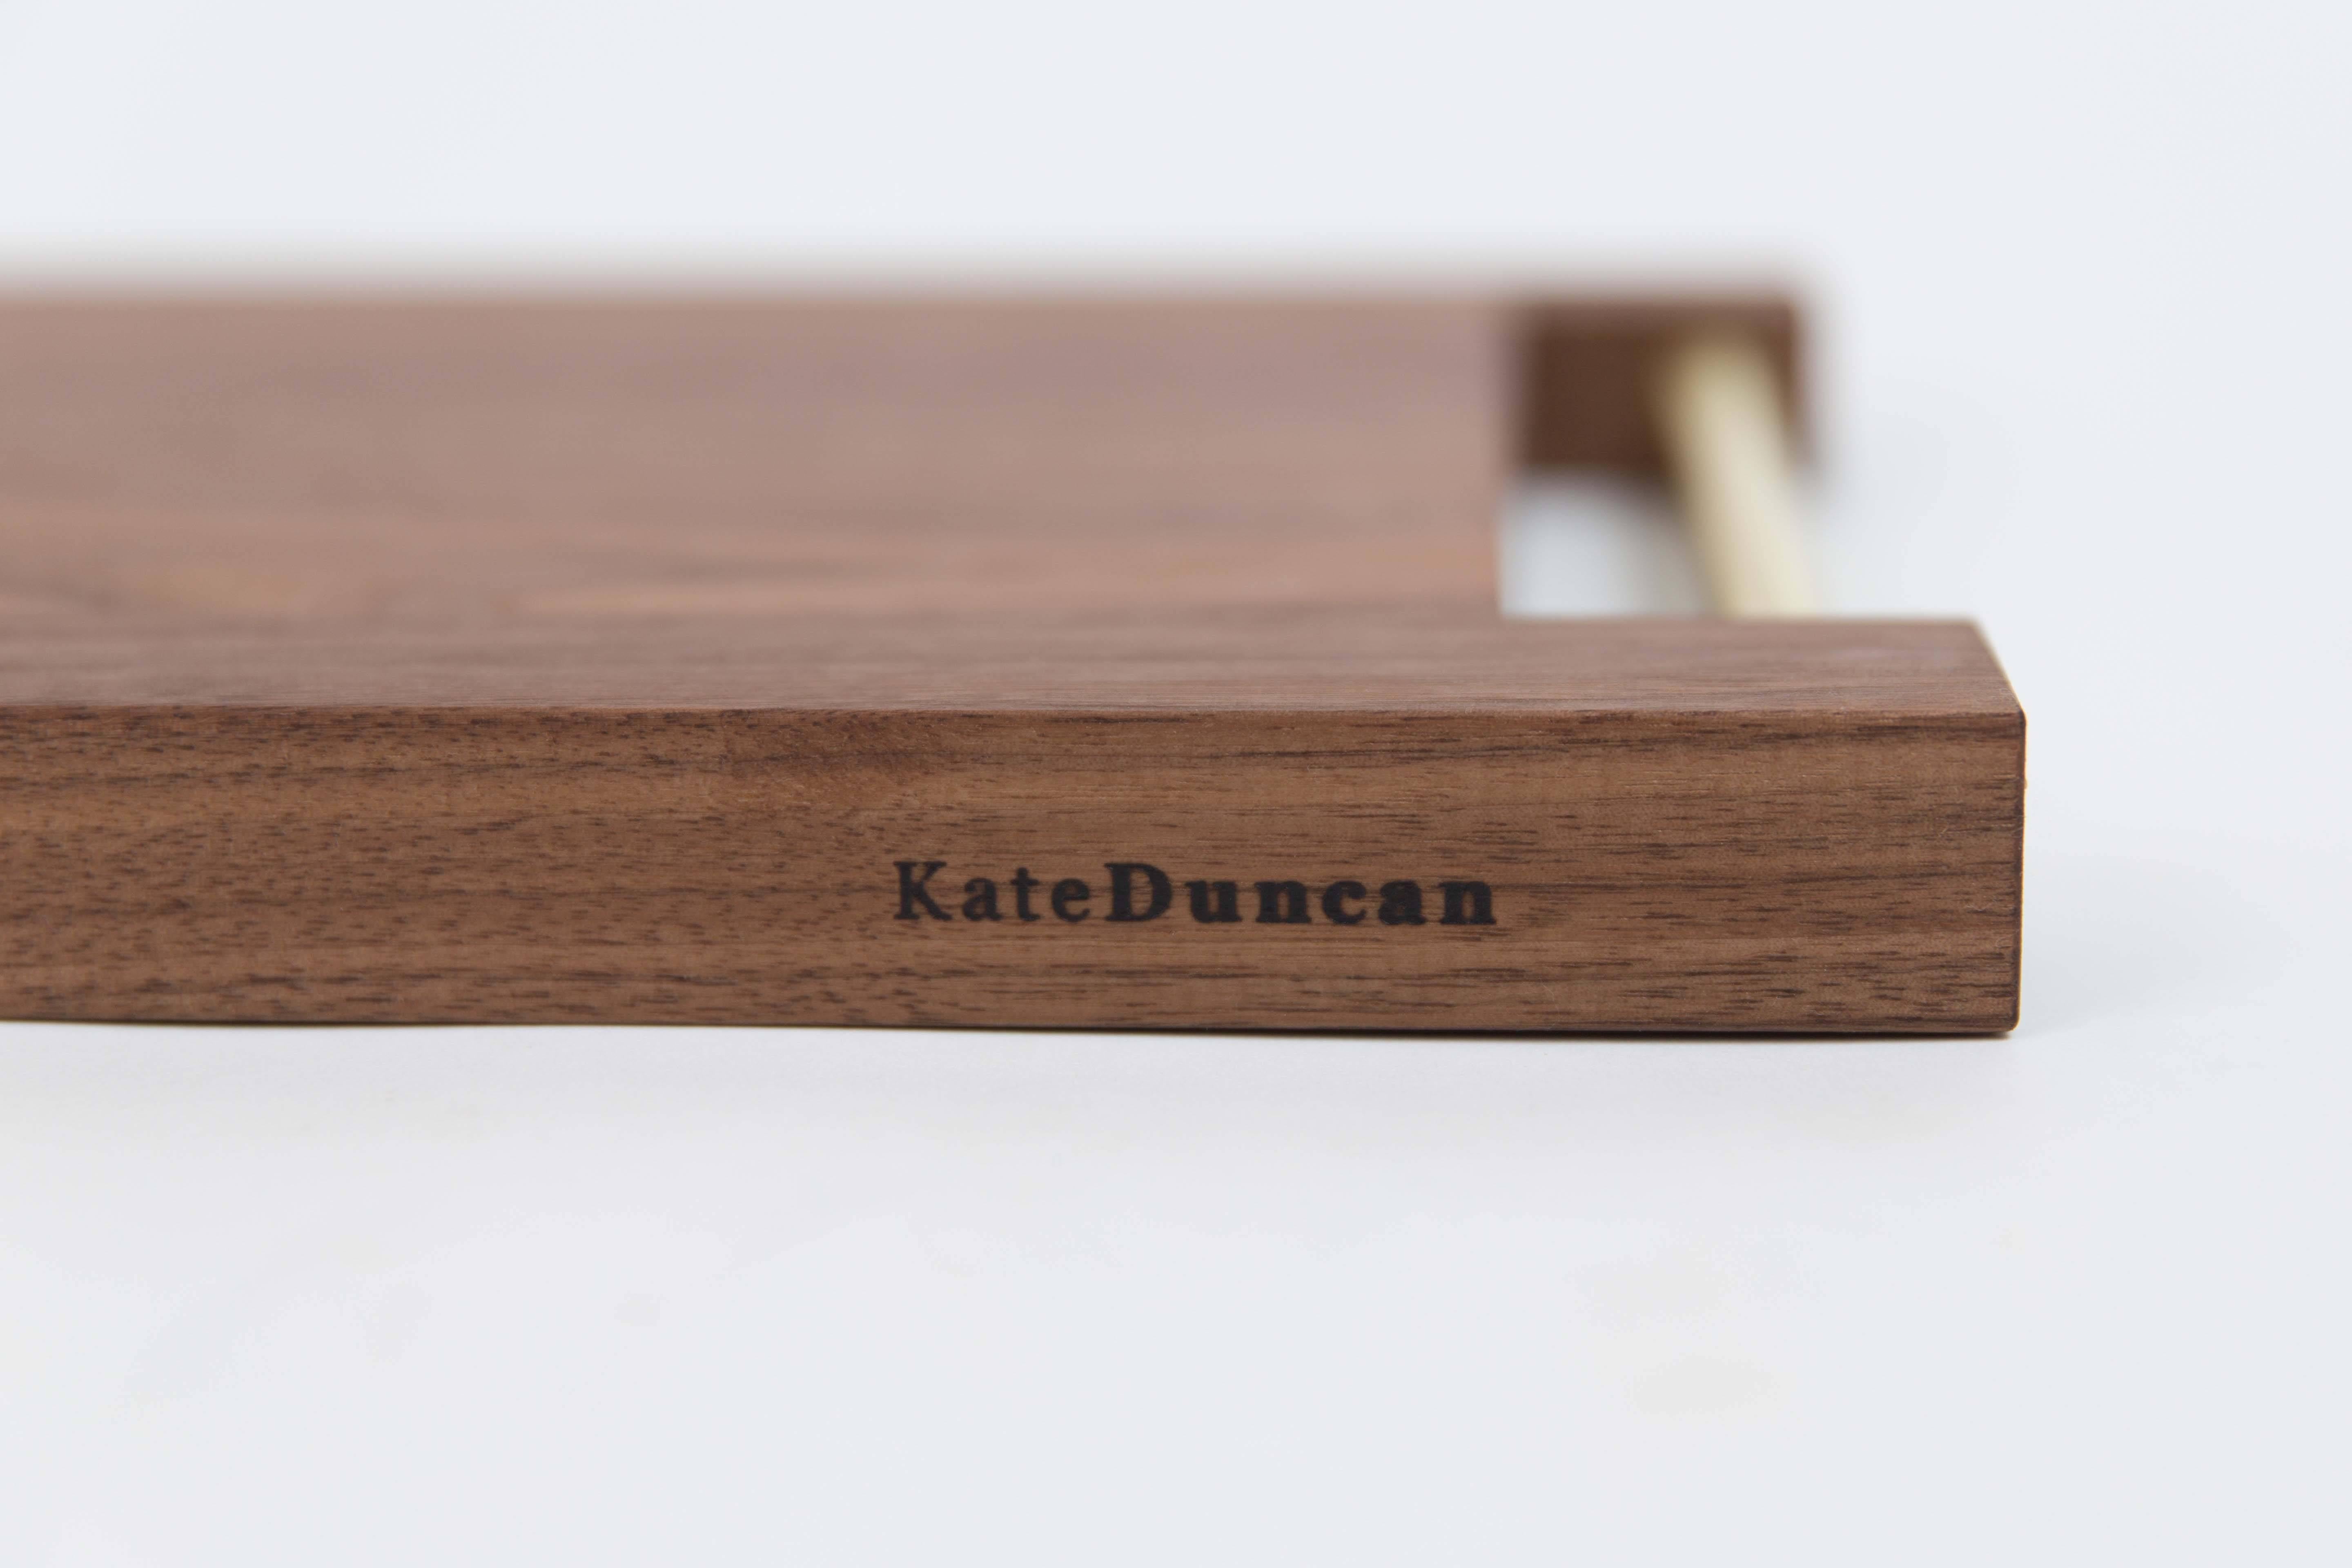 Comprised of a metal handle of either stainless steel or brass, inset into solid black walnut or maple to create a server that is beautiful yet functional. The Kate Duncan range of 